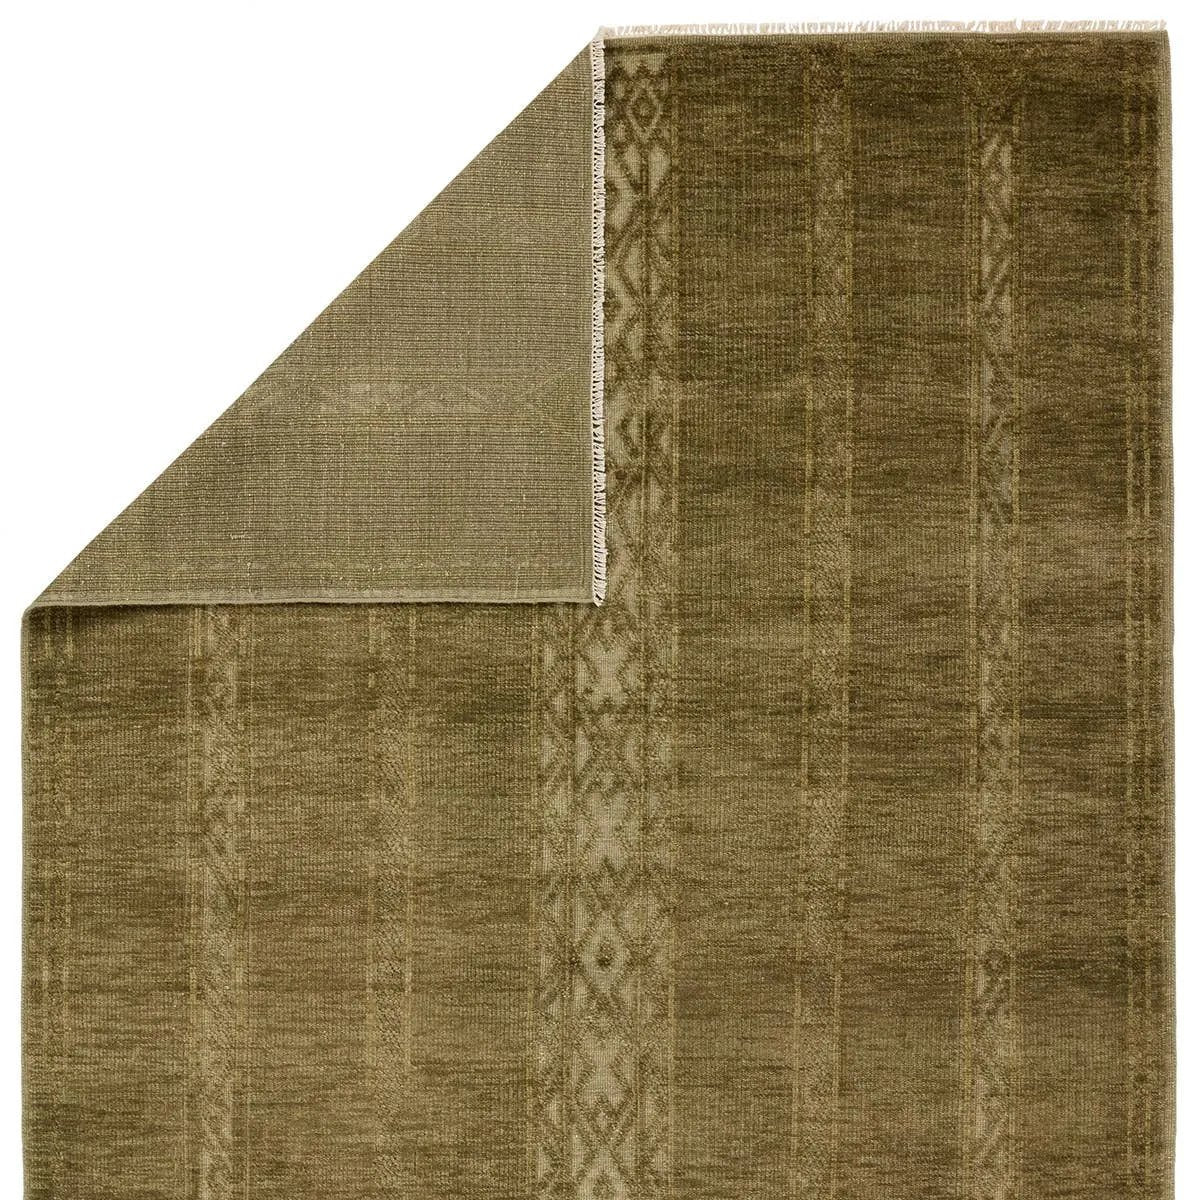 The hand-knotted Tapeten Achala features globally inspired designs that evoke a balance of tradition and modernity. The Achala pattern stuns with a high-low effect that distinguishes the olive green, geometric, striped pattern. Amethyst Home provides interior design, new home construction design consulting, vintage area rugs, and lighting in the Winter Garden metro area.